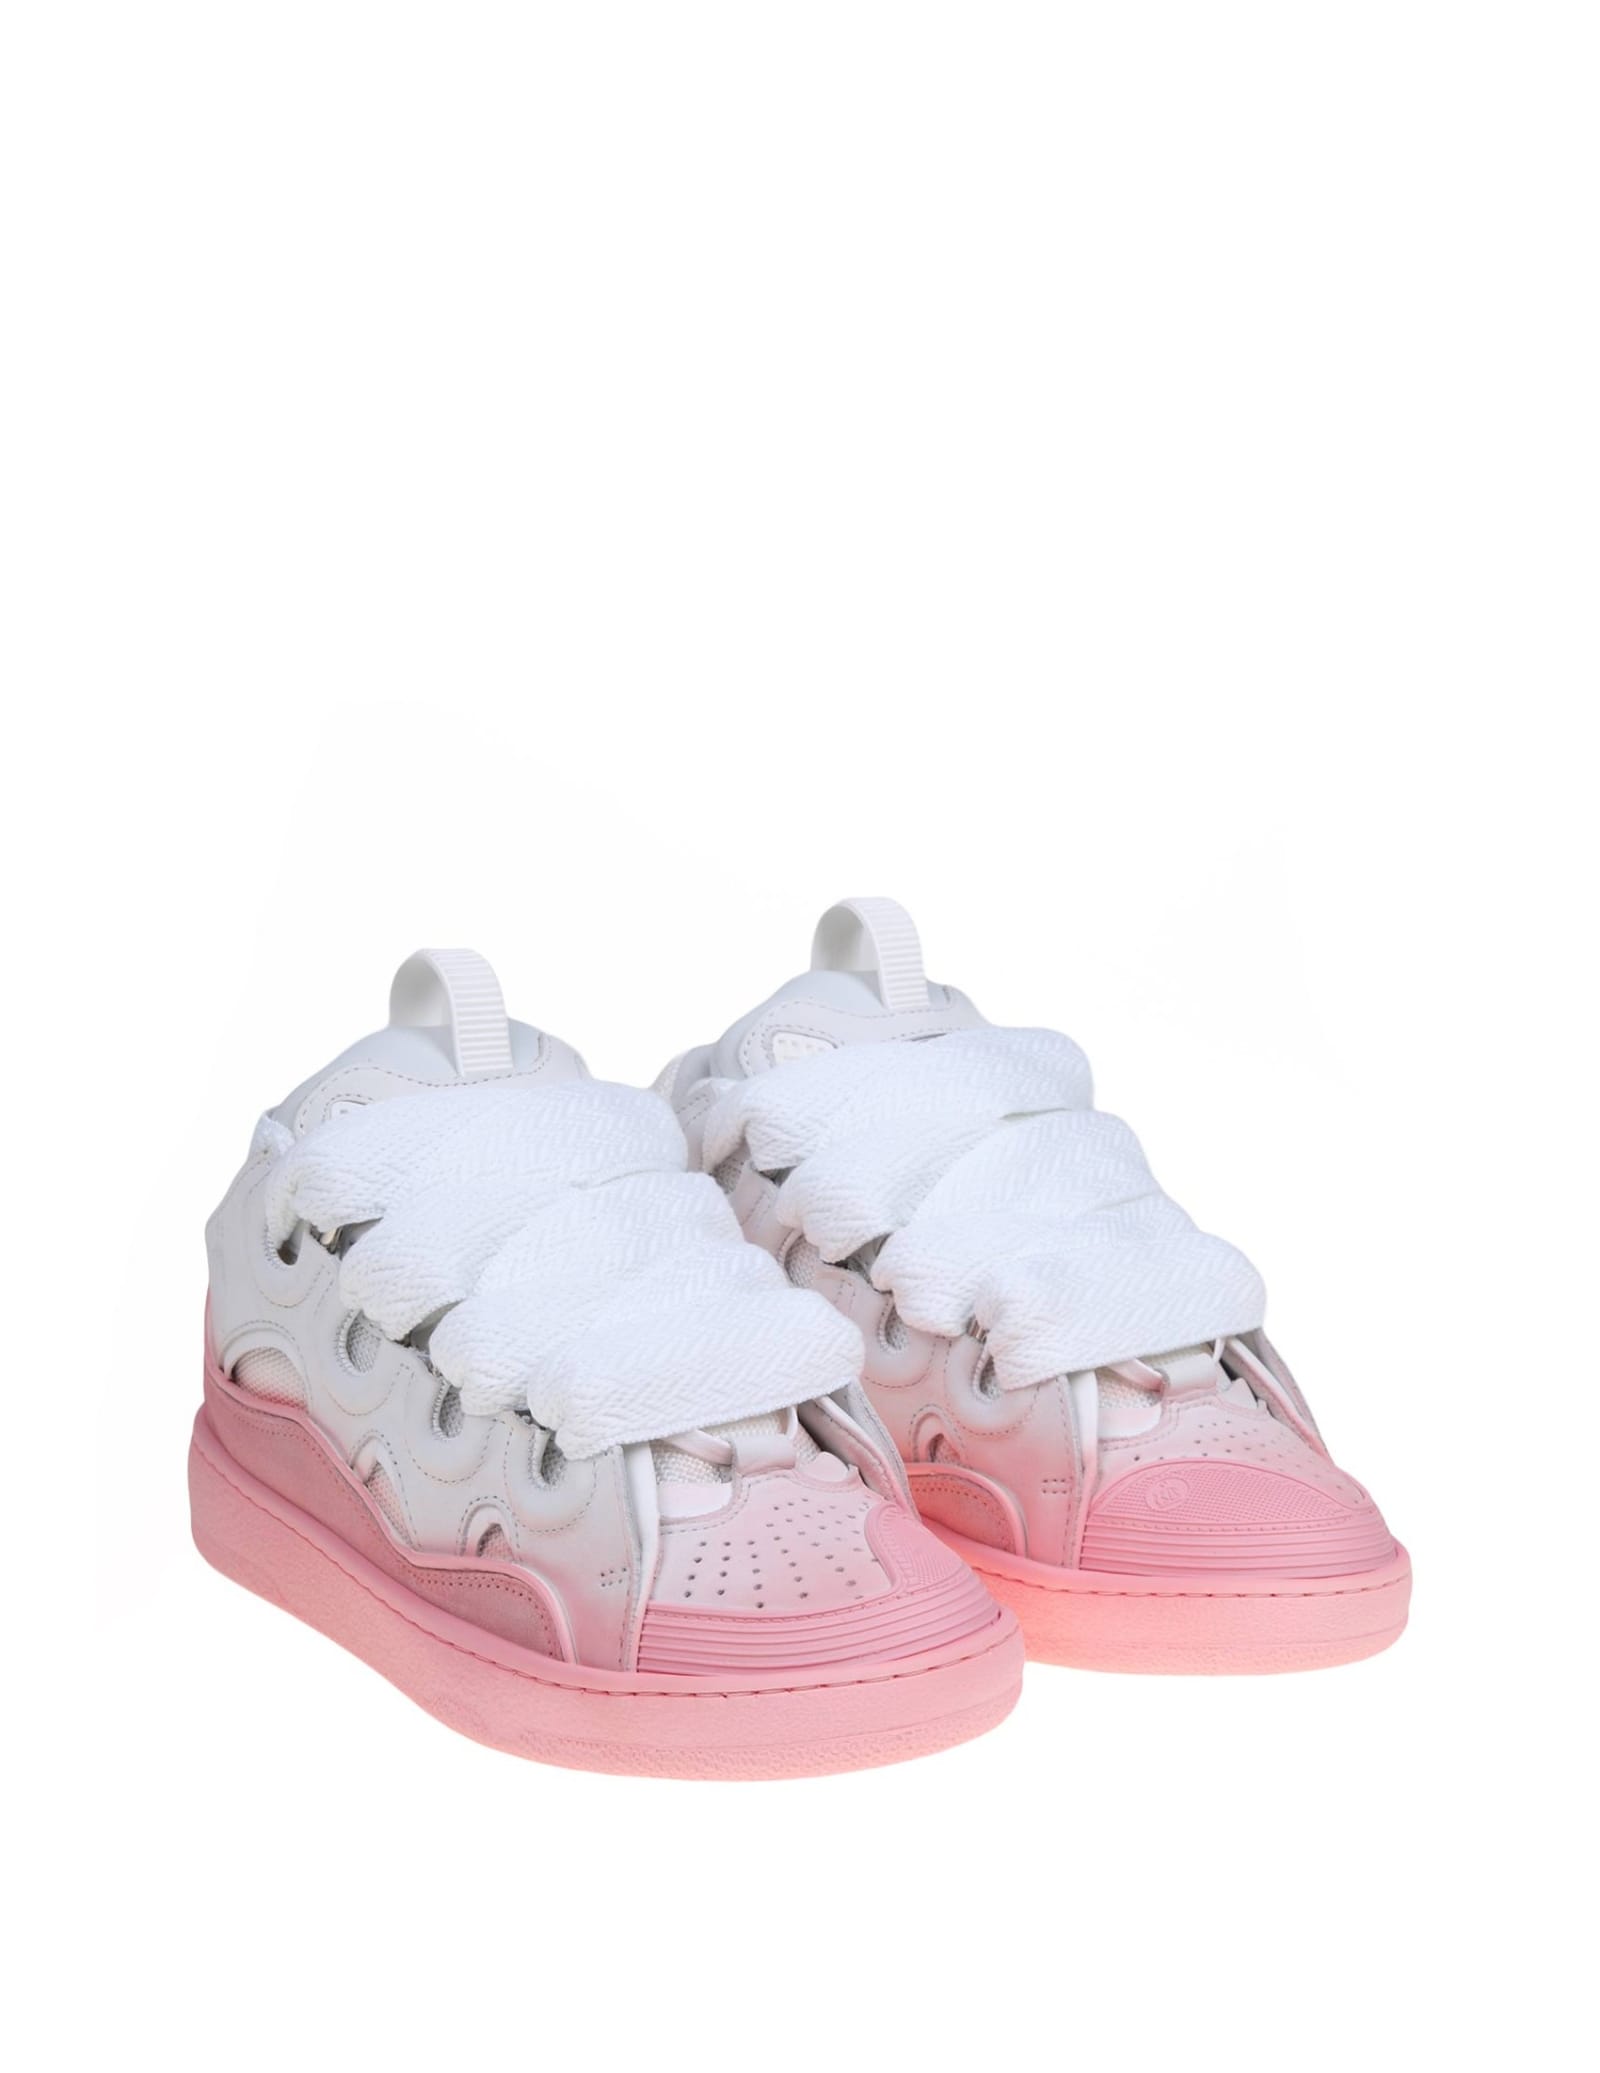 Shop Lanvin Curb Sneakers In White And Pink Leather